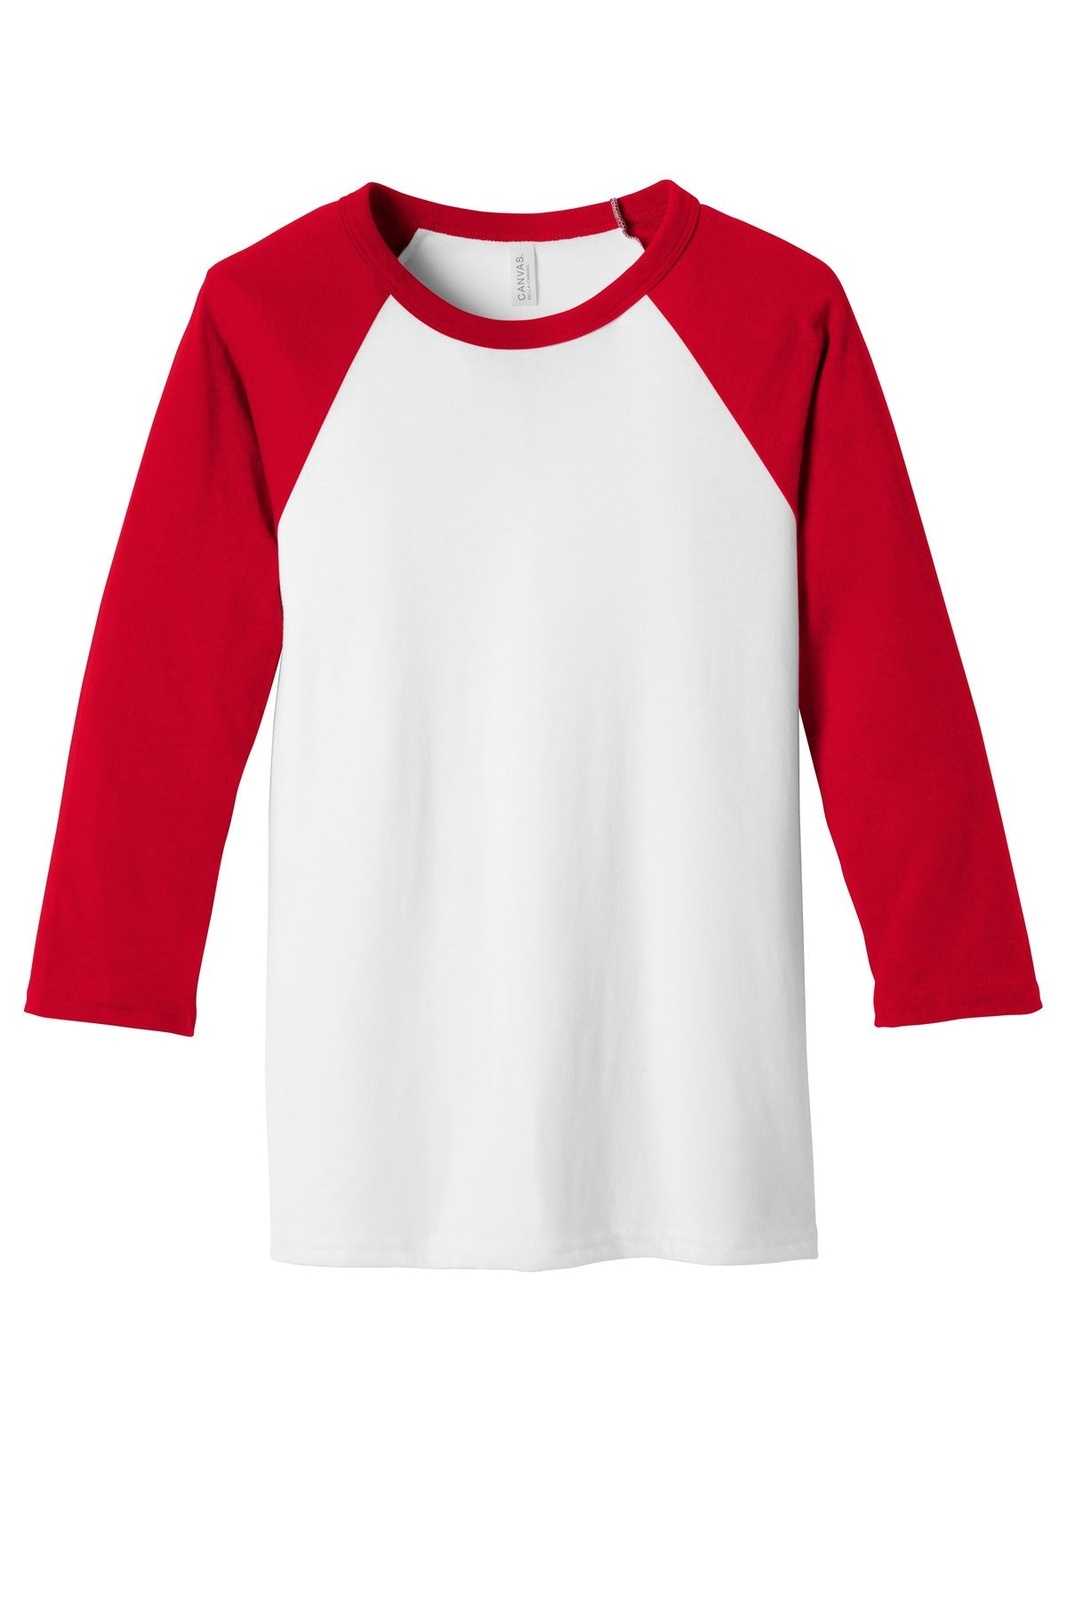 Bella + Canvas 3200 Unisex 3/4-Sleeve Baseball Tee - White Red - HIT a Double